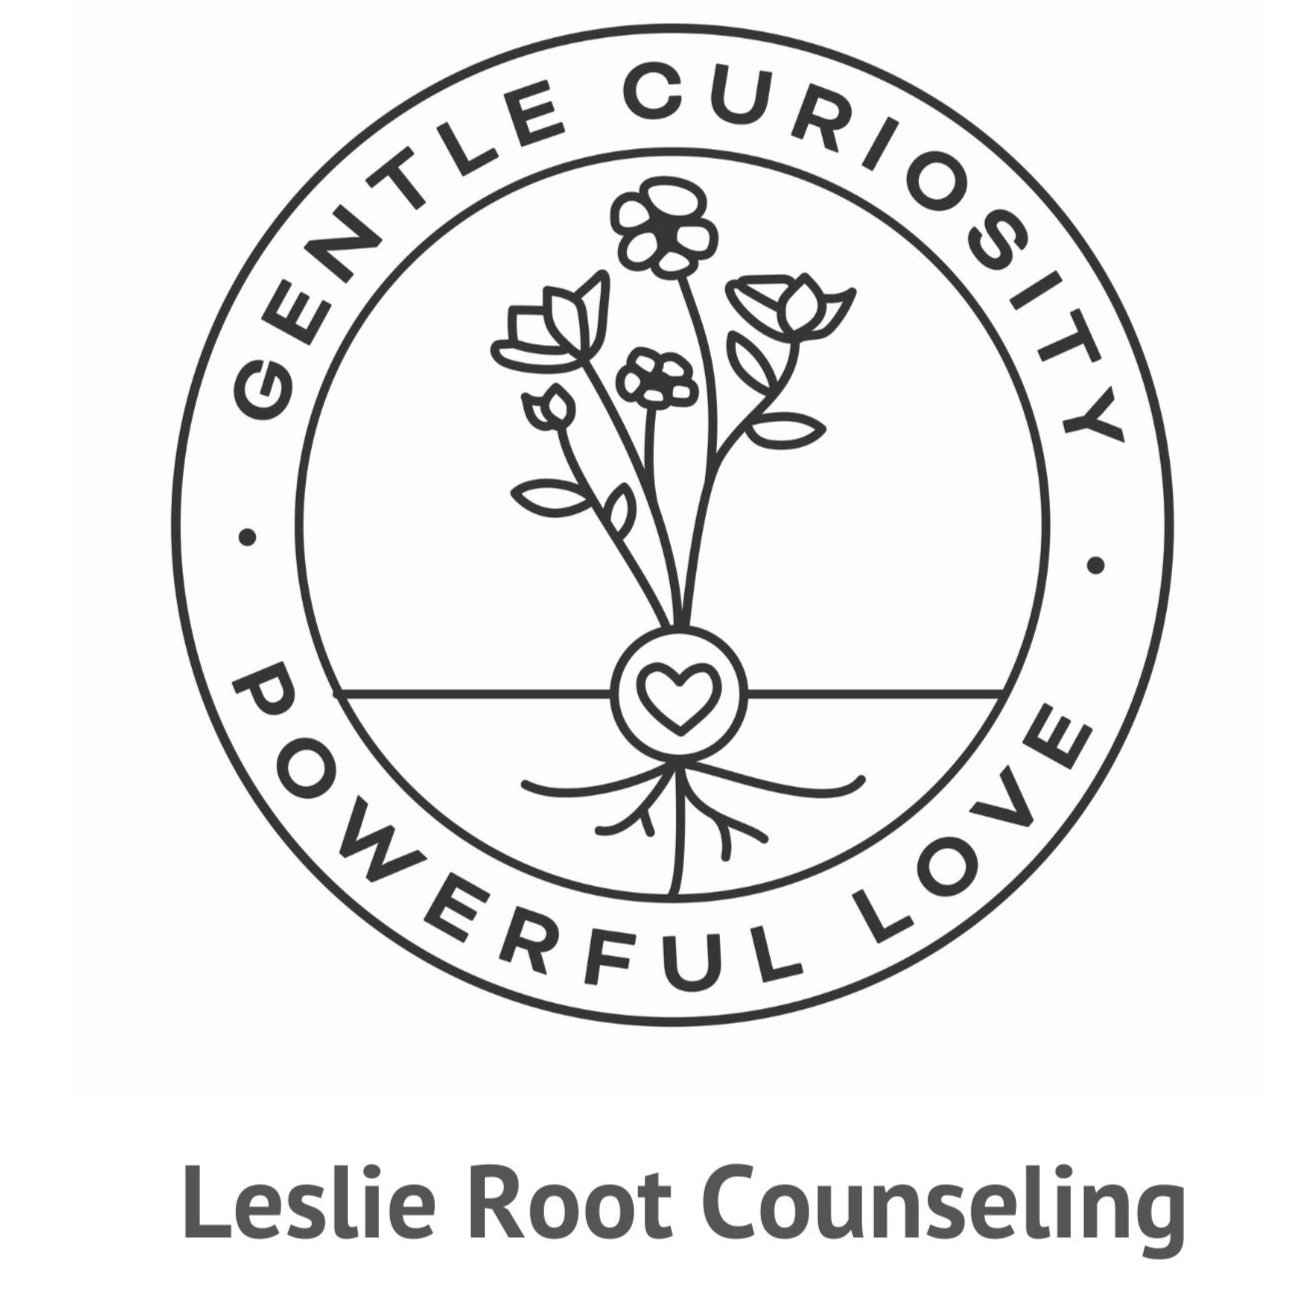 Leslie Root Counseling